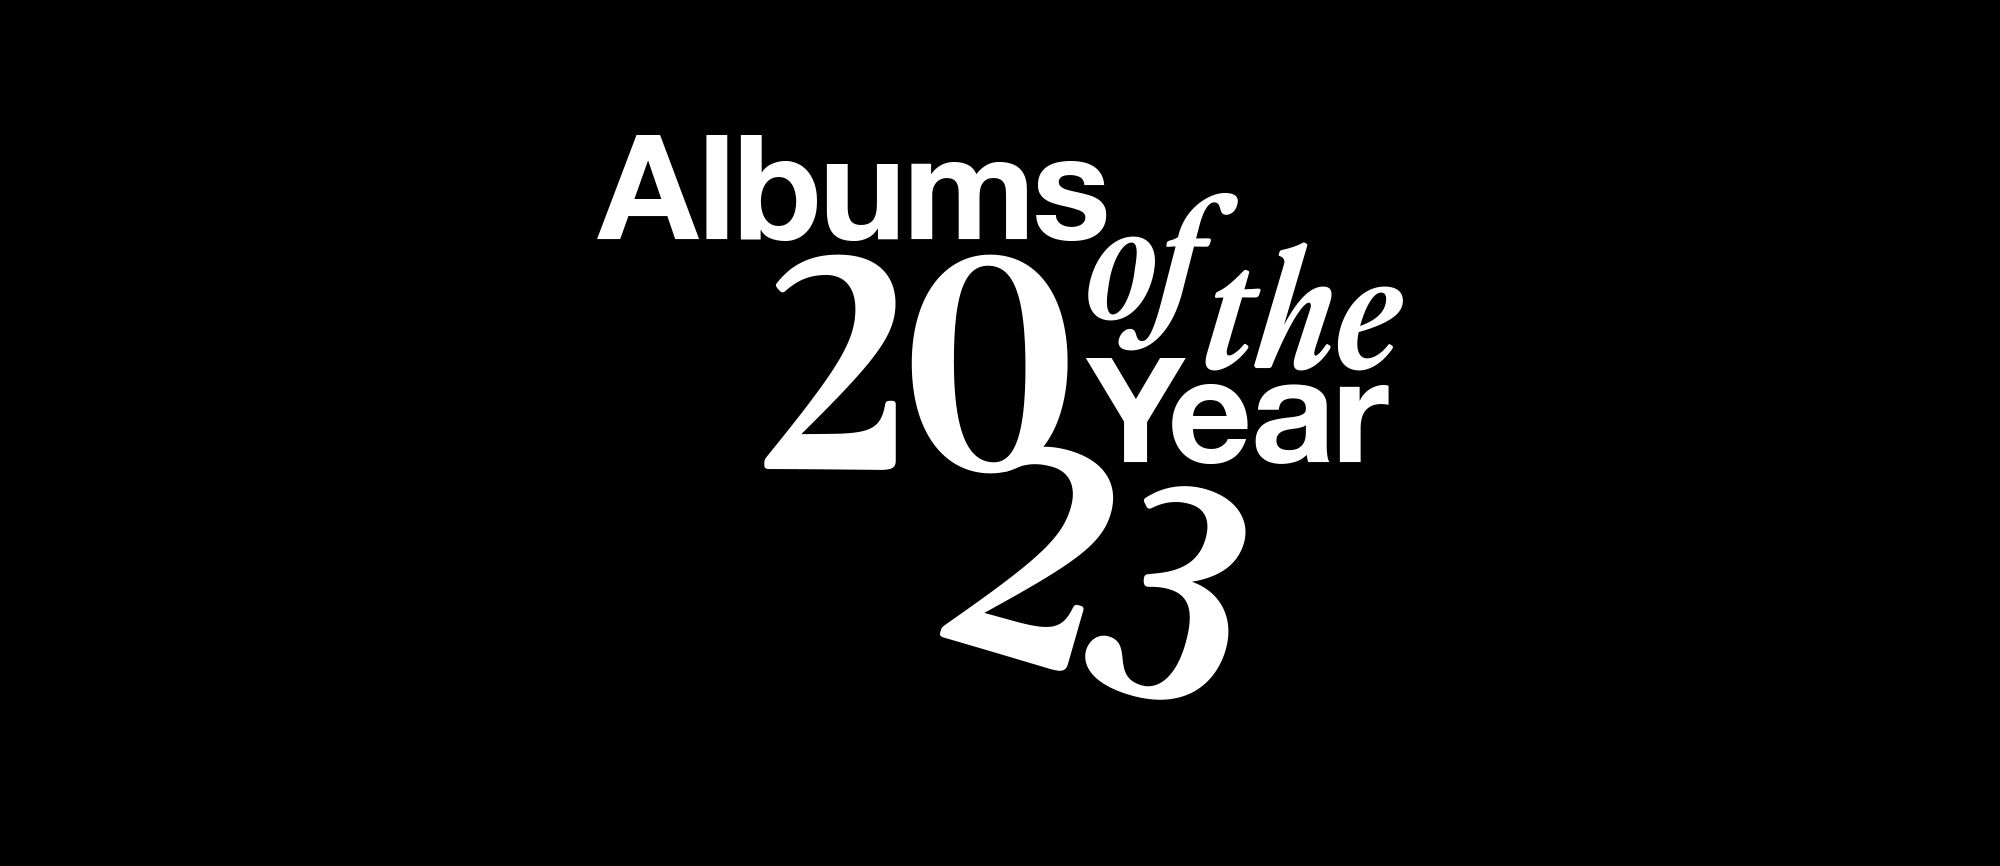 Albums of the Year 2023 | Rough Trade UK